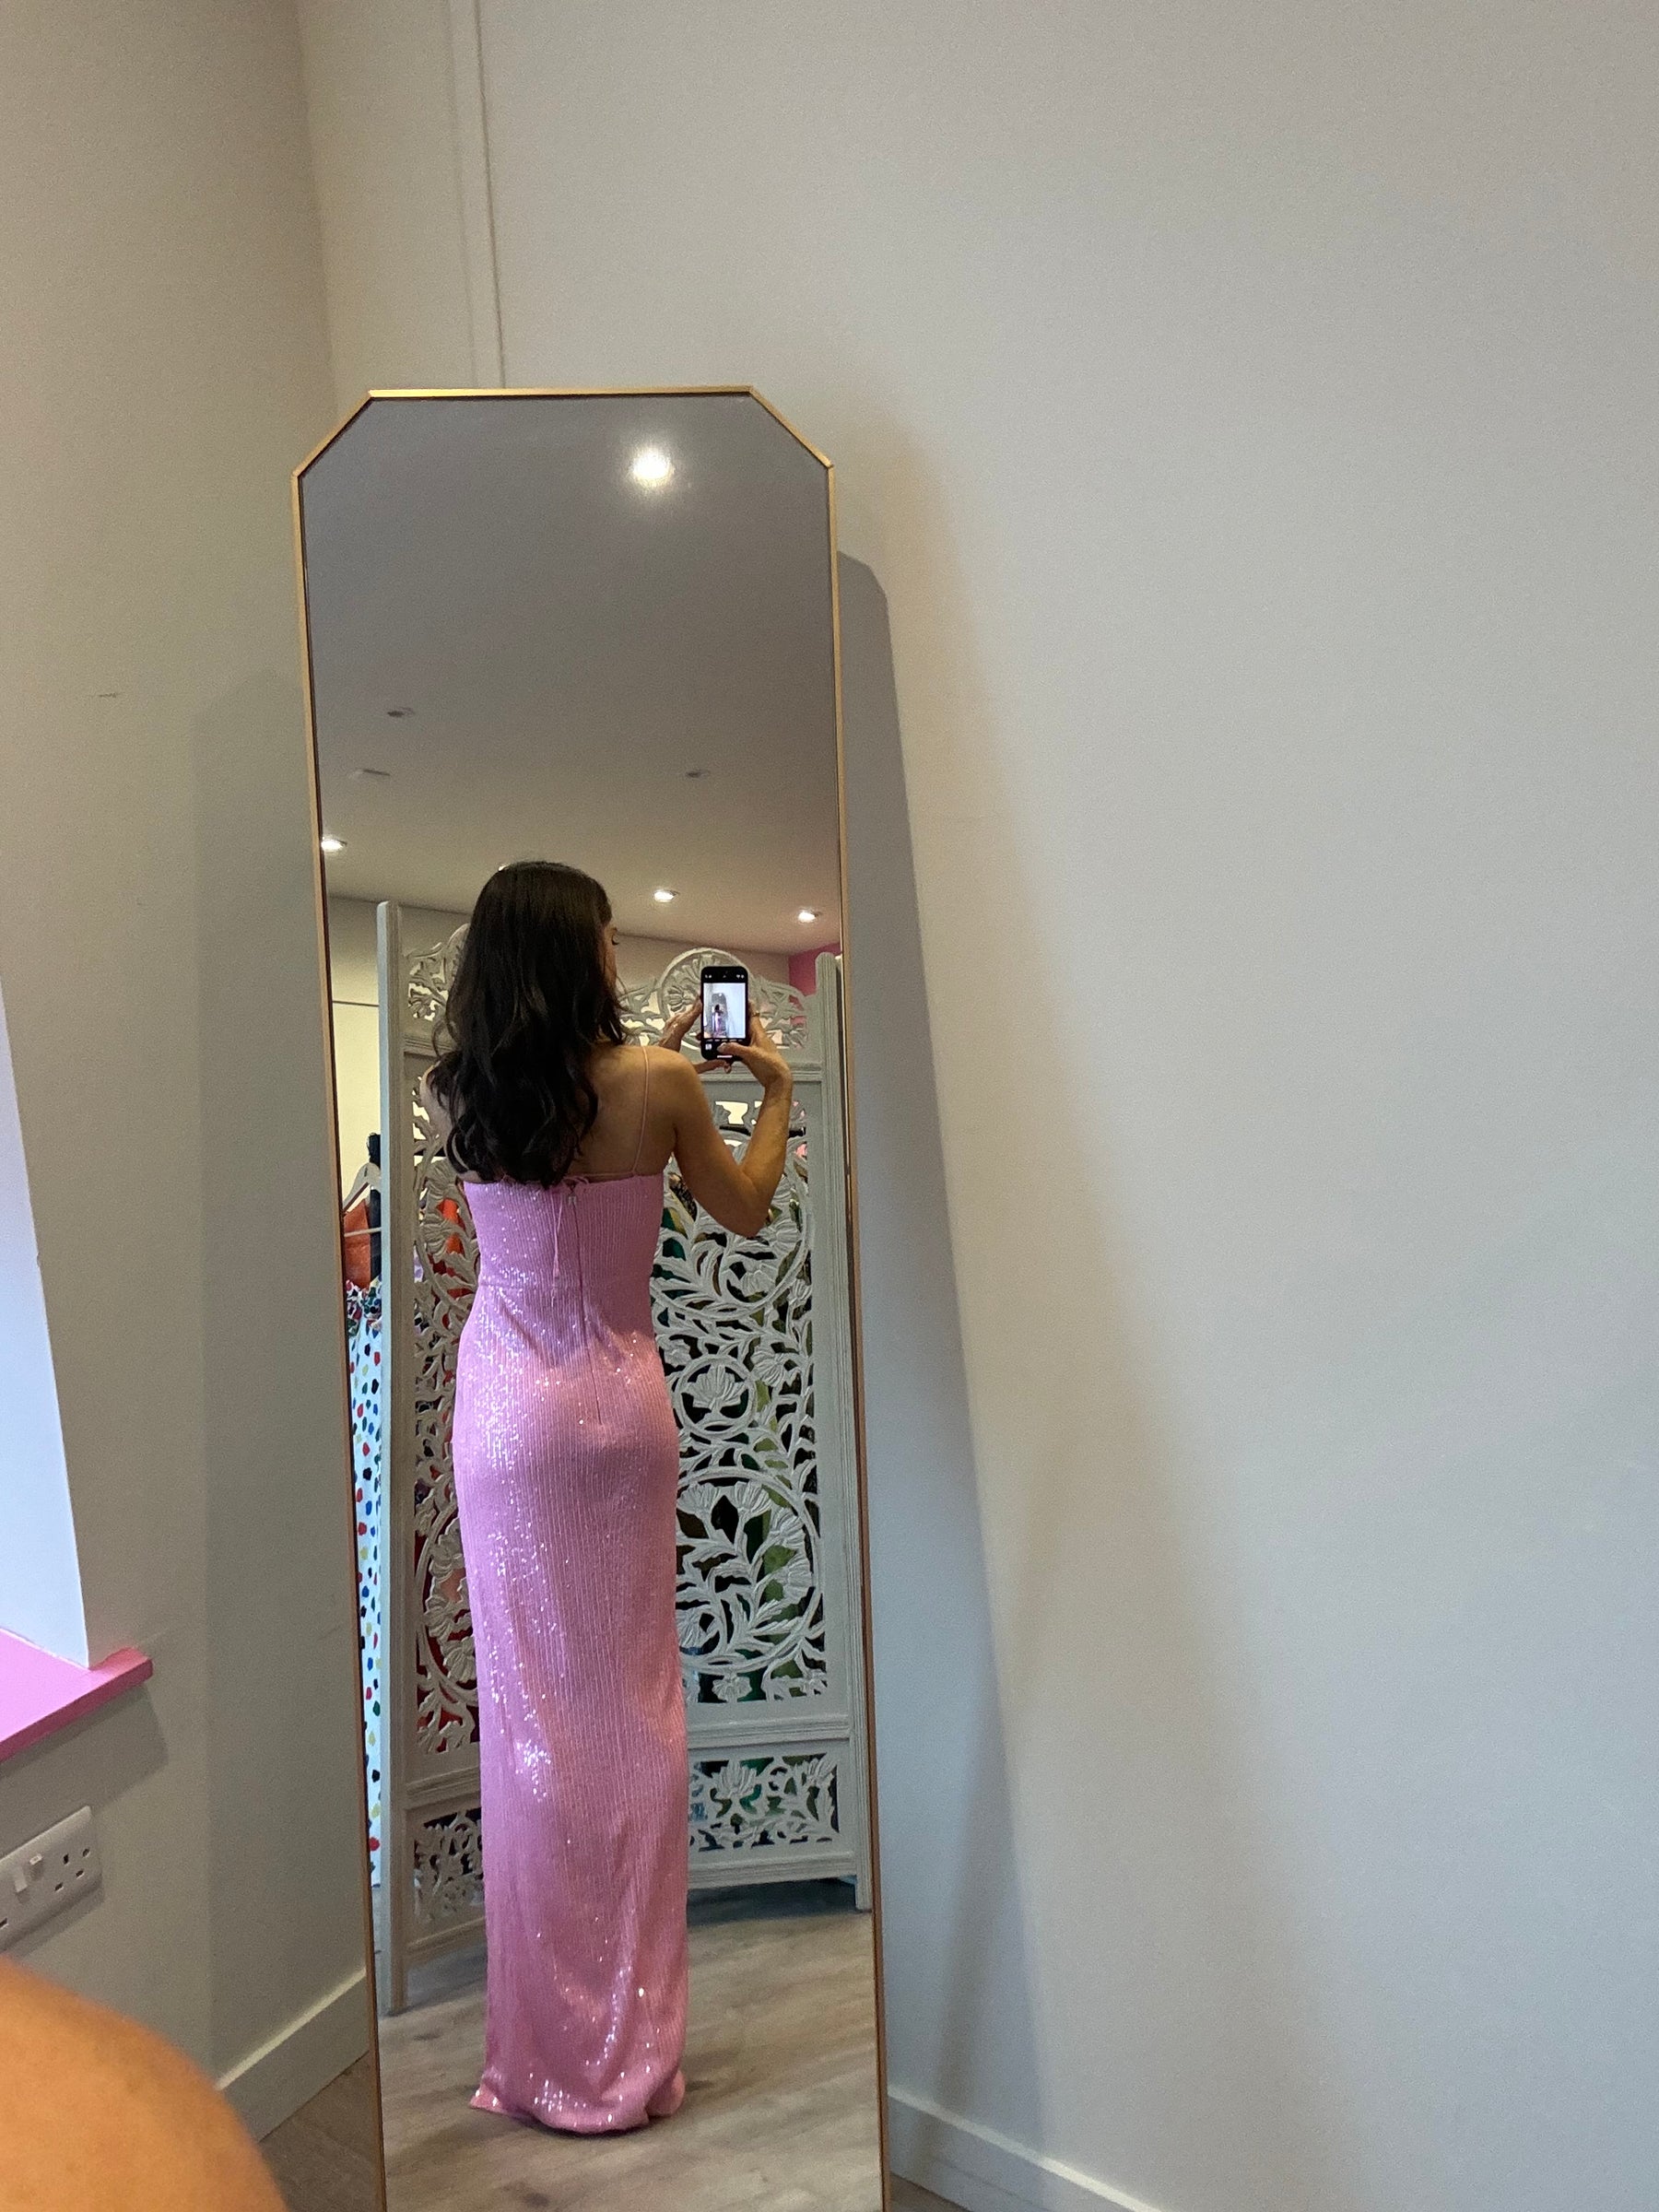 ROTATE Pink Sequin Strap Maxi